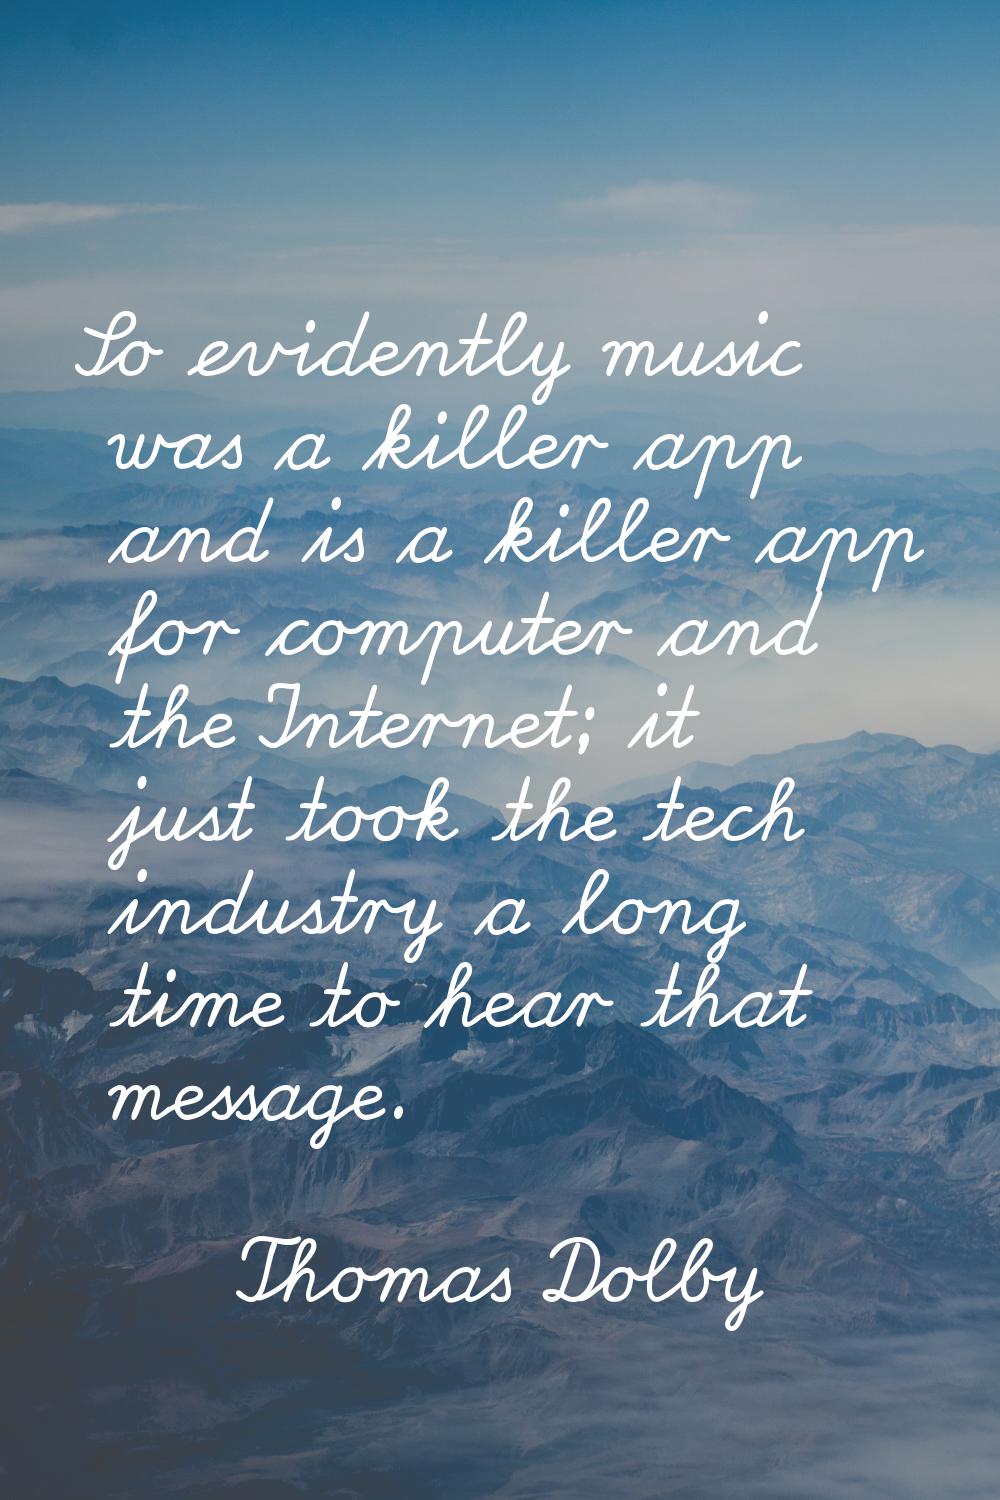 So evidently music was a killer app and is a killer app for computer and the Internet; it just took